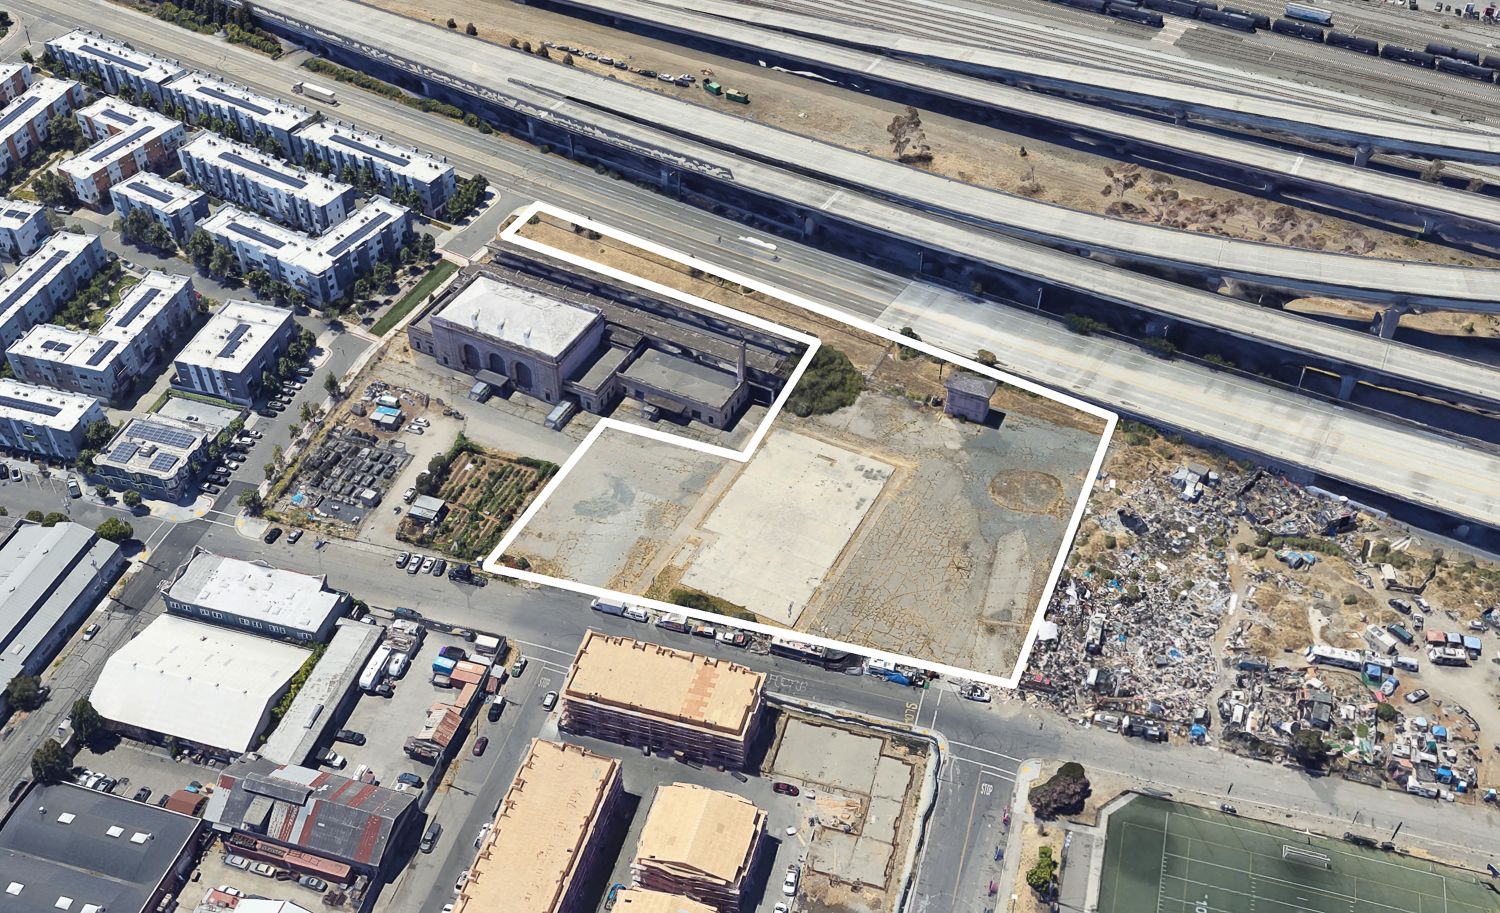 1405 Wood Street property outlined approximately by YIMBY, image via Google Satellite